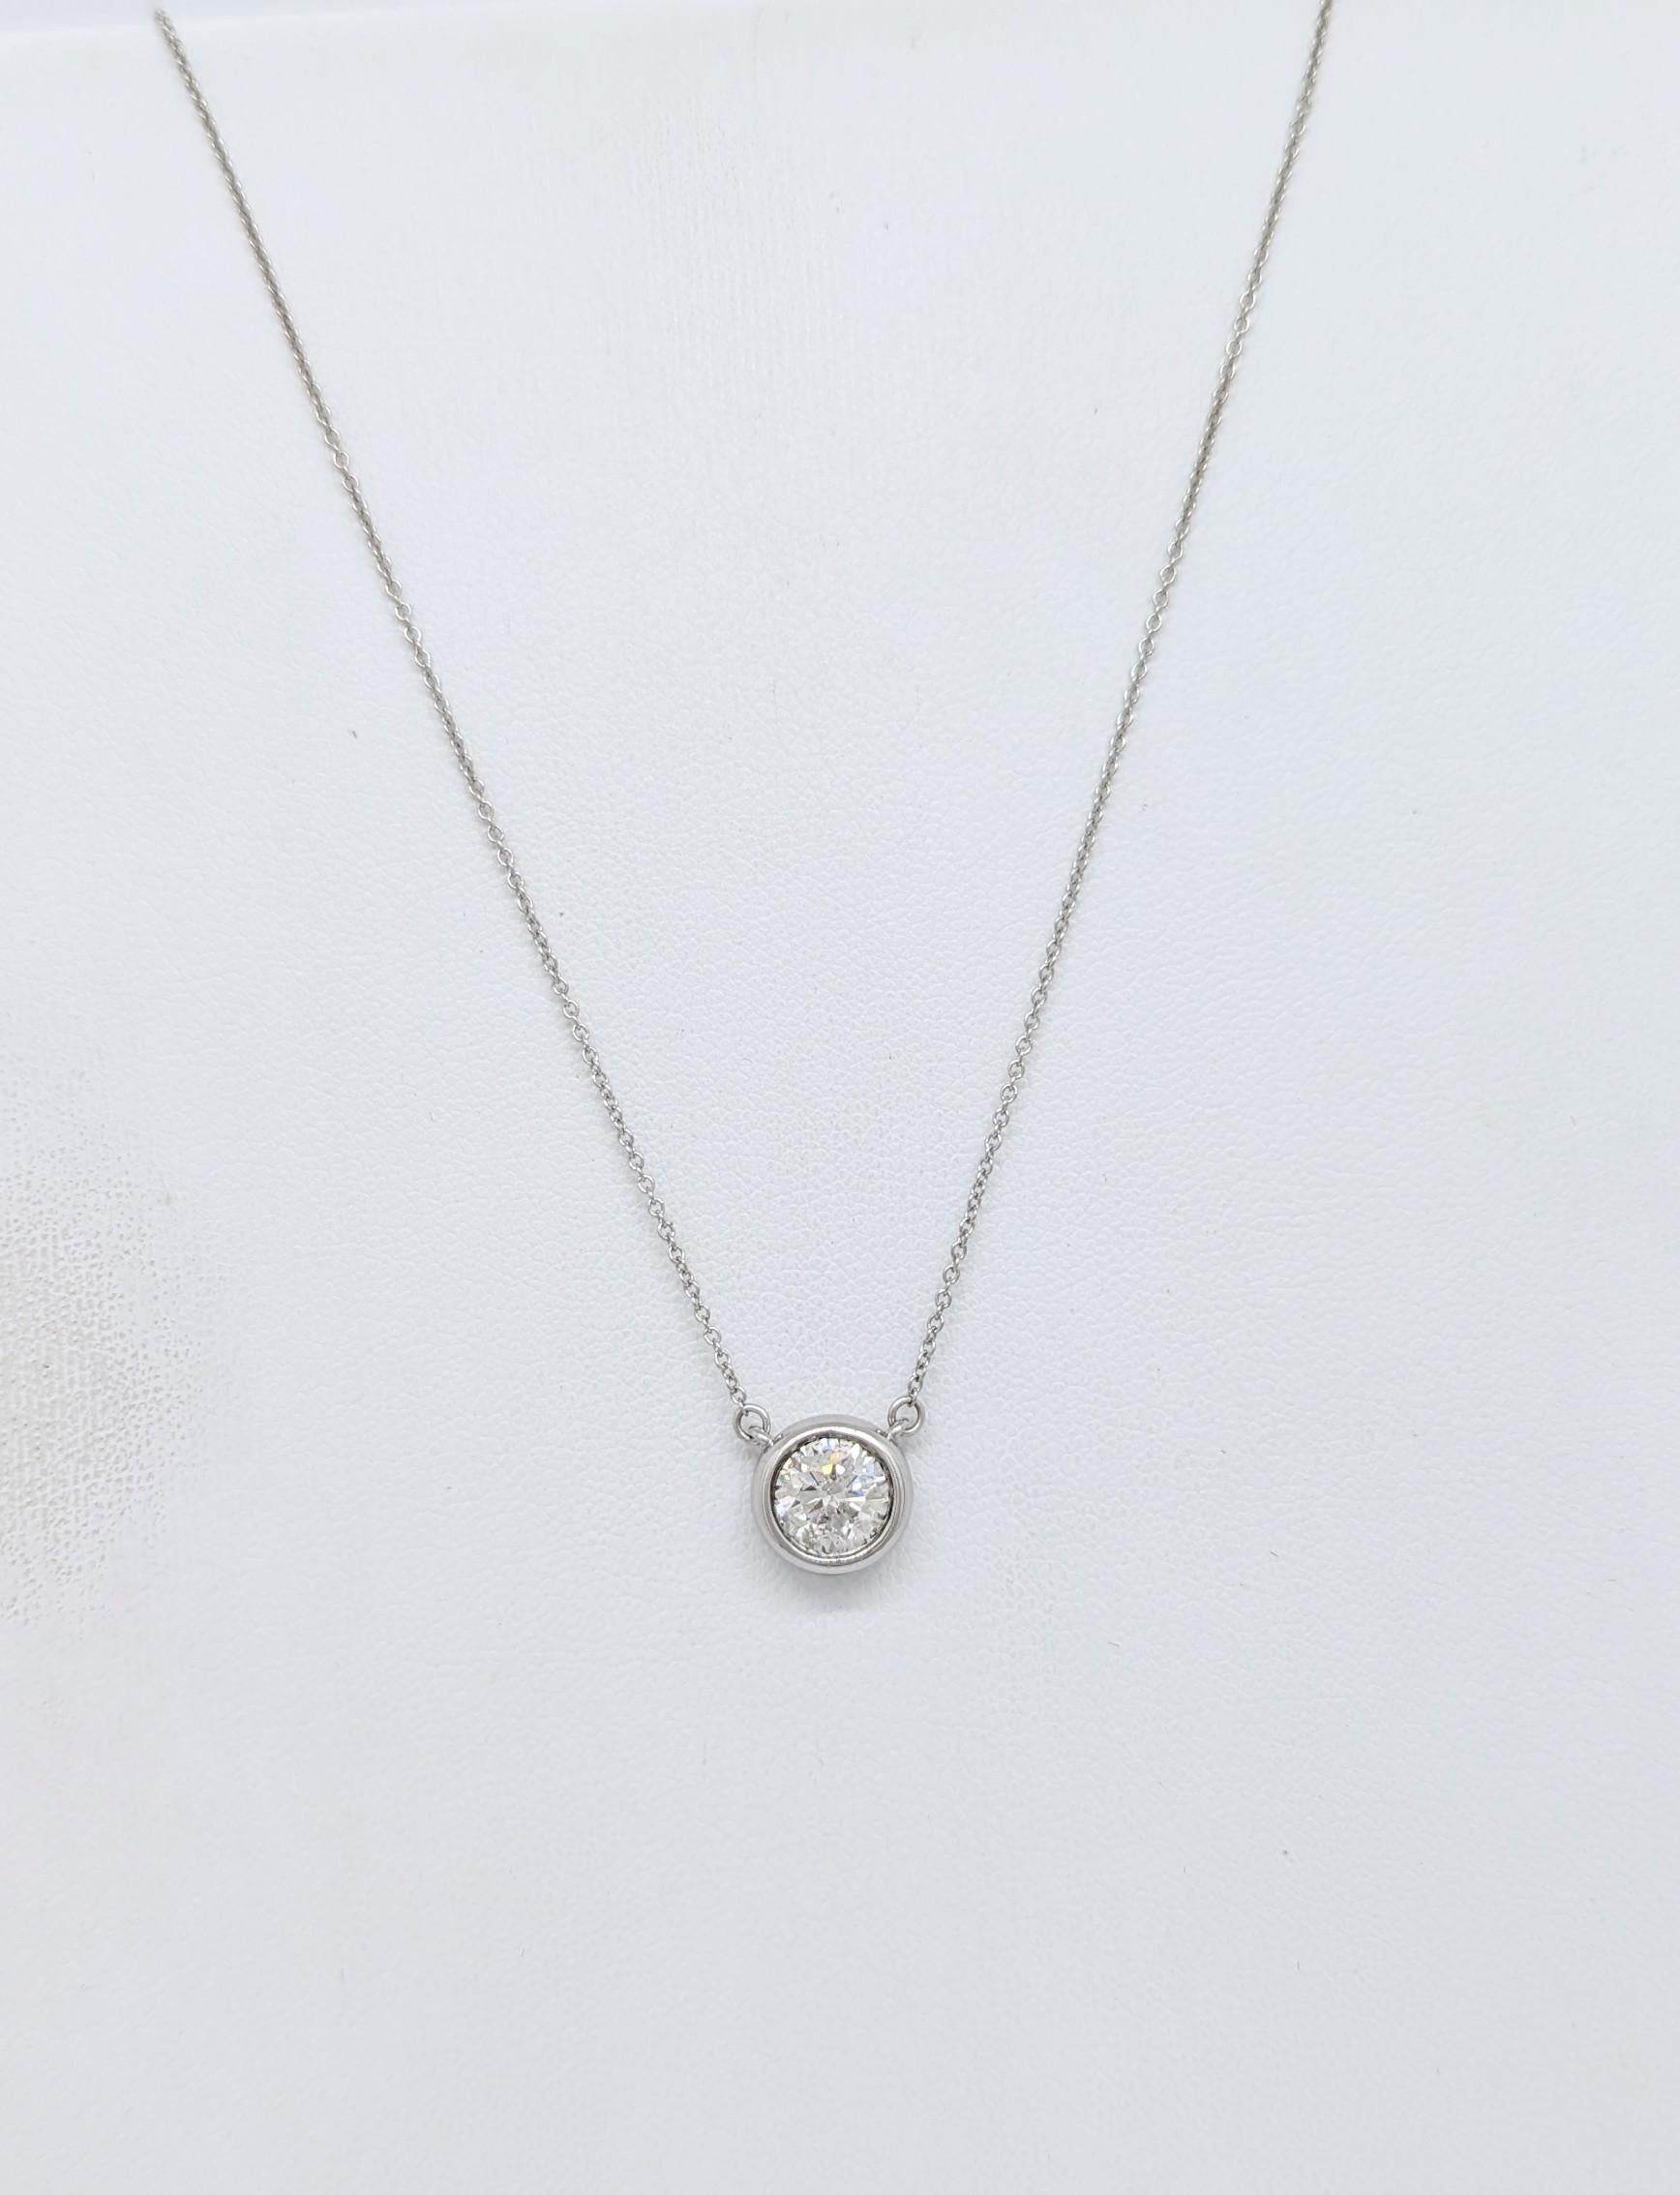 White Diamond Round Bezel Pendant Necklace in 14K White Gold In New Condition For Sale In Los Angeles, CA